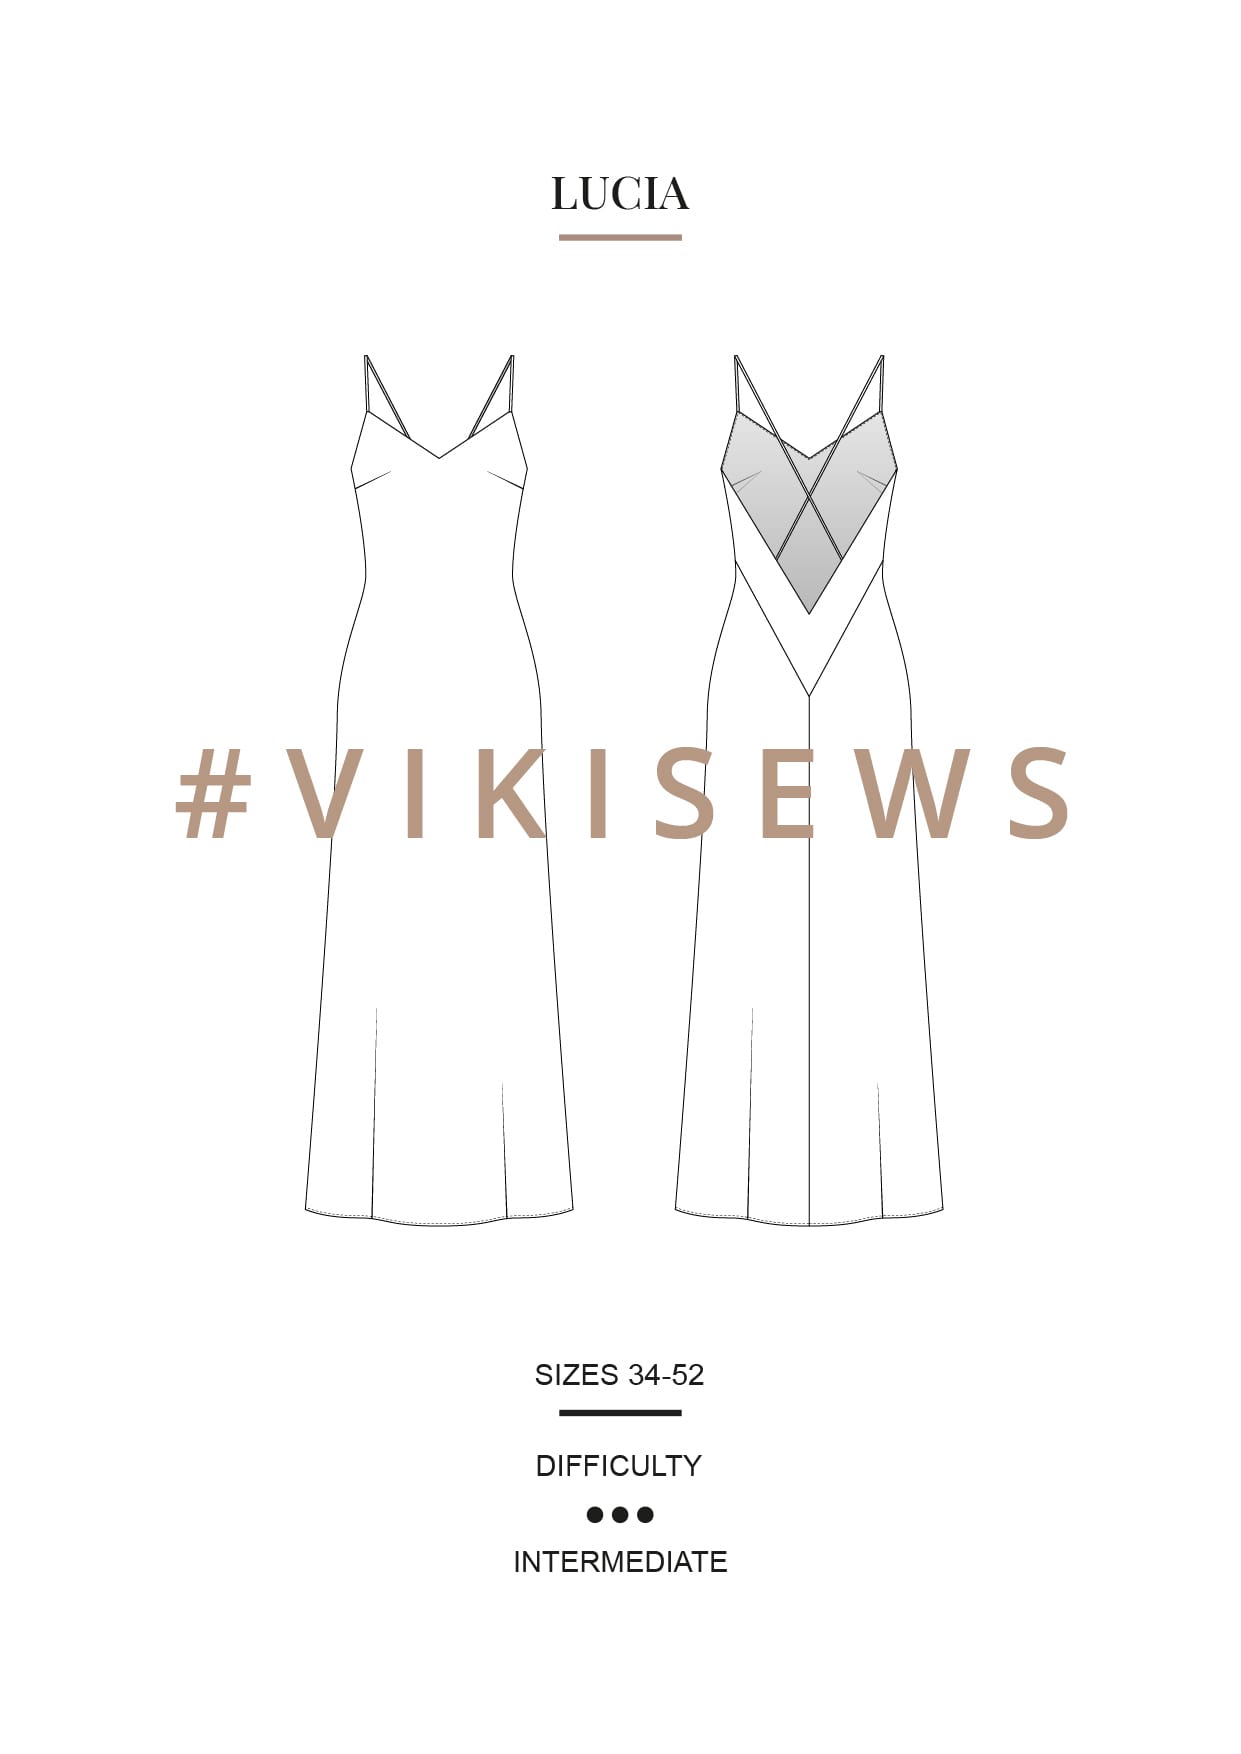 Vikisews Sewing Patterns for Women - Violet Dress Sewing Pattern for Women  - Size US2 - US20 Plus Size - Appropriate for Beginners with Easy to Follow